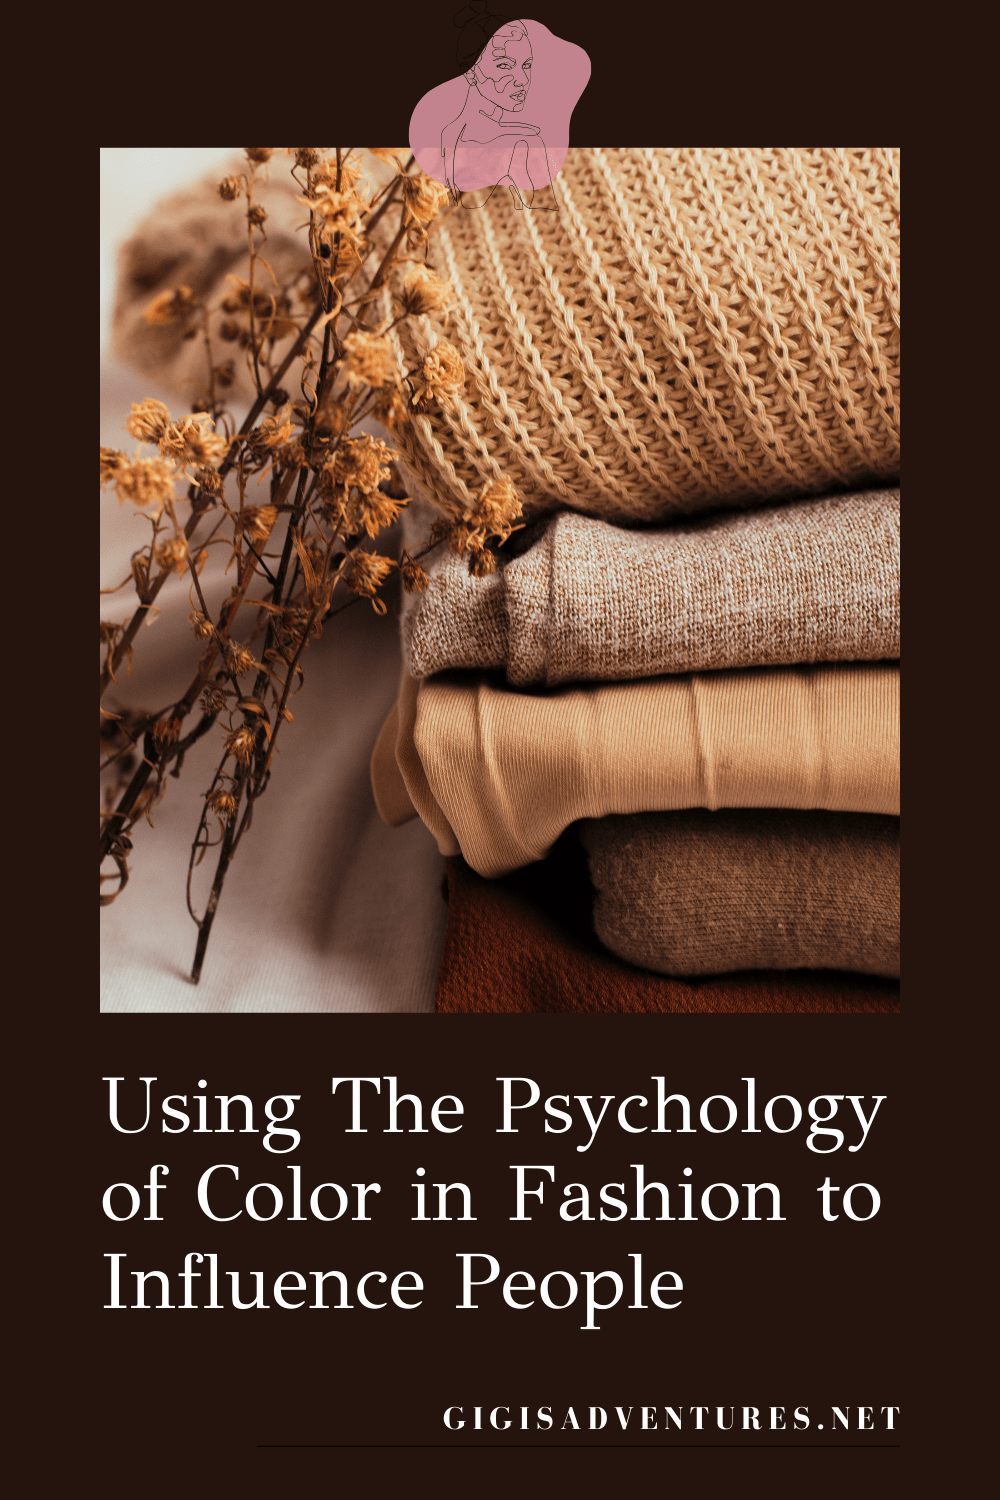 Using The Psychology of Color in Fashion to Influence People